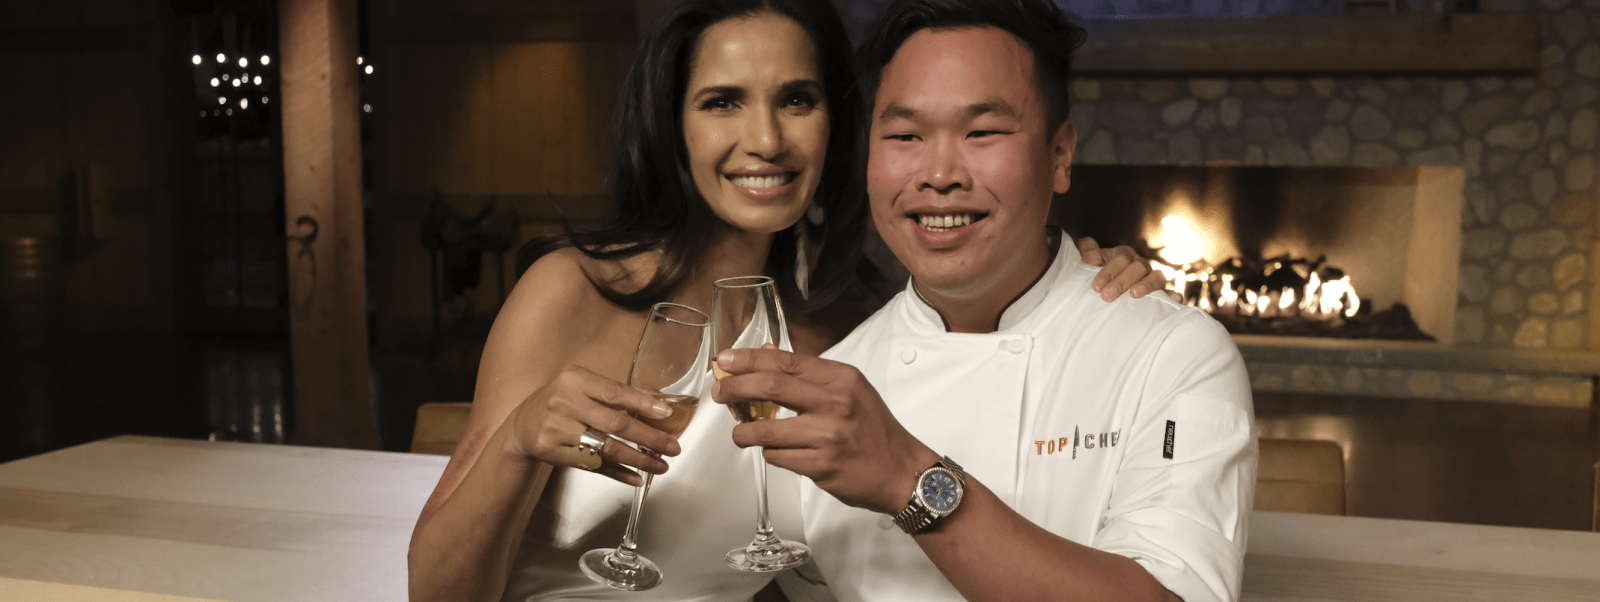 ‘TOP CHEF’ WINNER BUDDHA LO WANTS TO OPEN A SPOT WITH ‘A COOL BROOKLYN FLAIR’